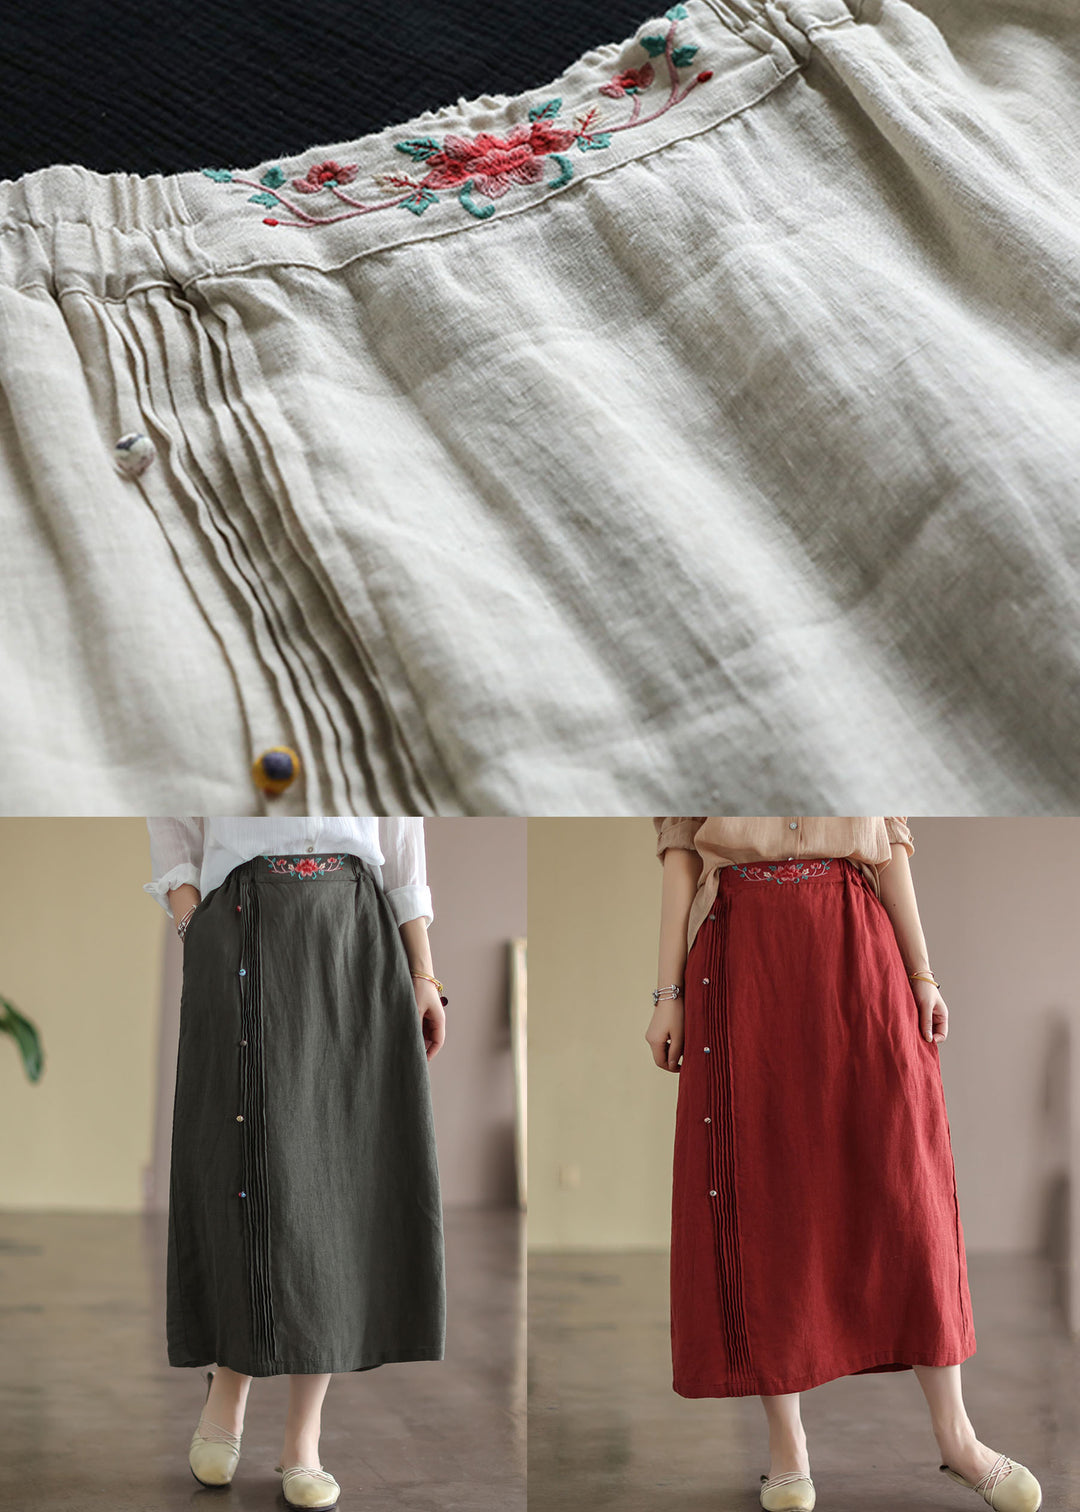 Women Red Wrinkled Embroideried Patchwork Cotton Skirts Summer